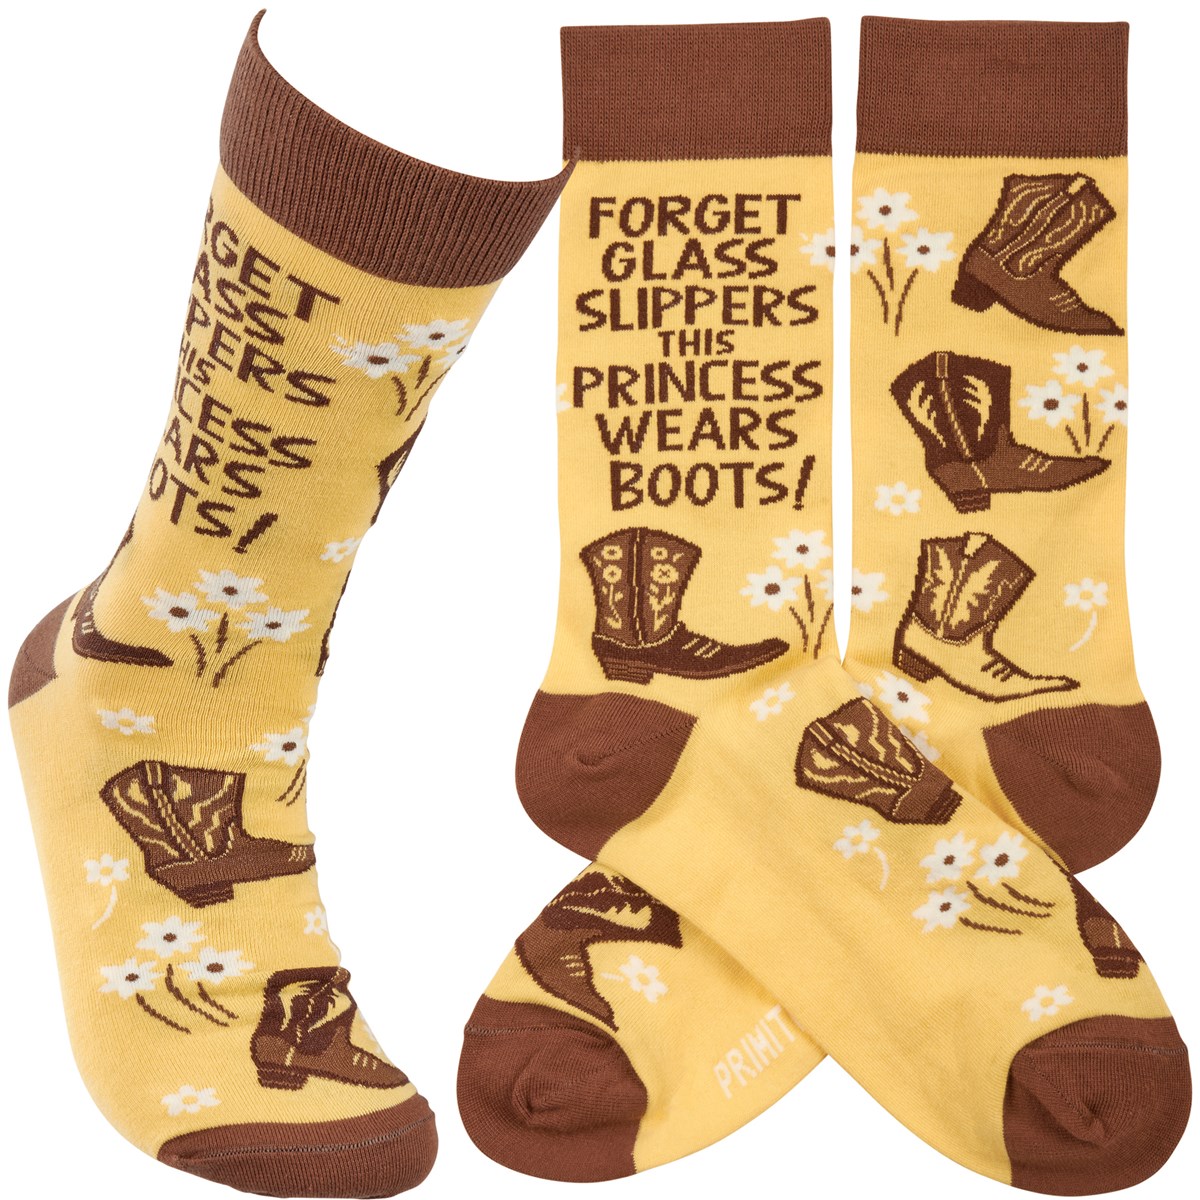 Socks - This Princess Wears Boots - One Size Fits Most - Cotton, Nylon, Spandex